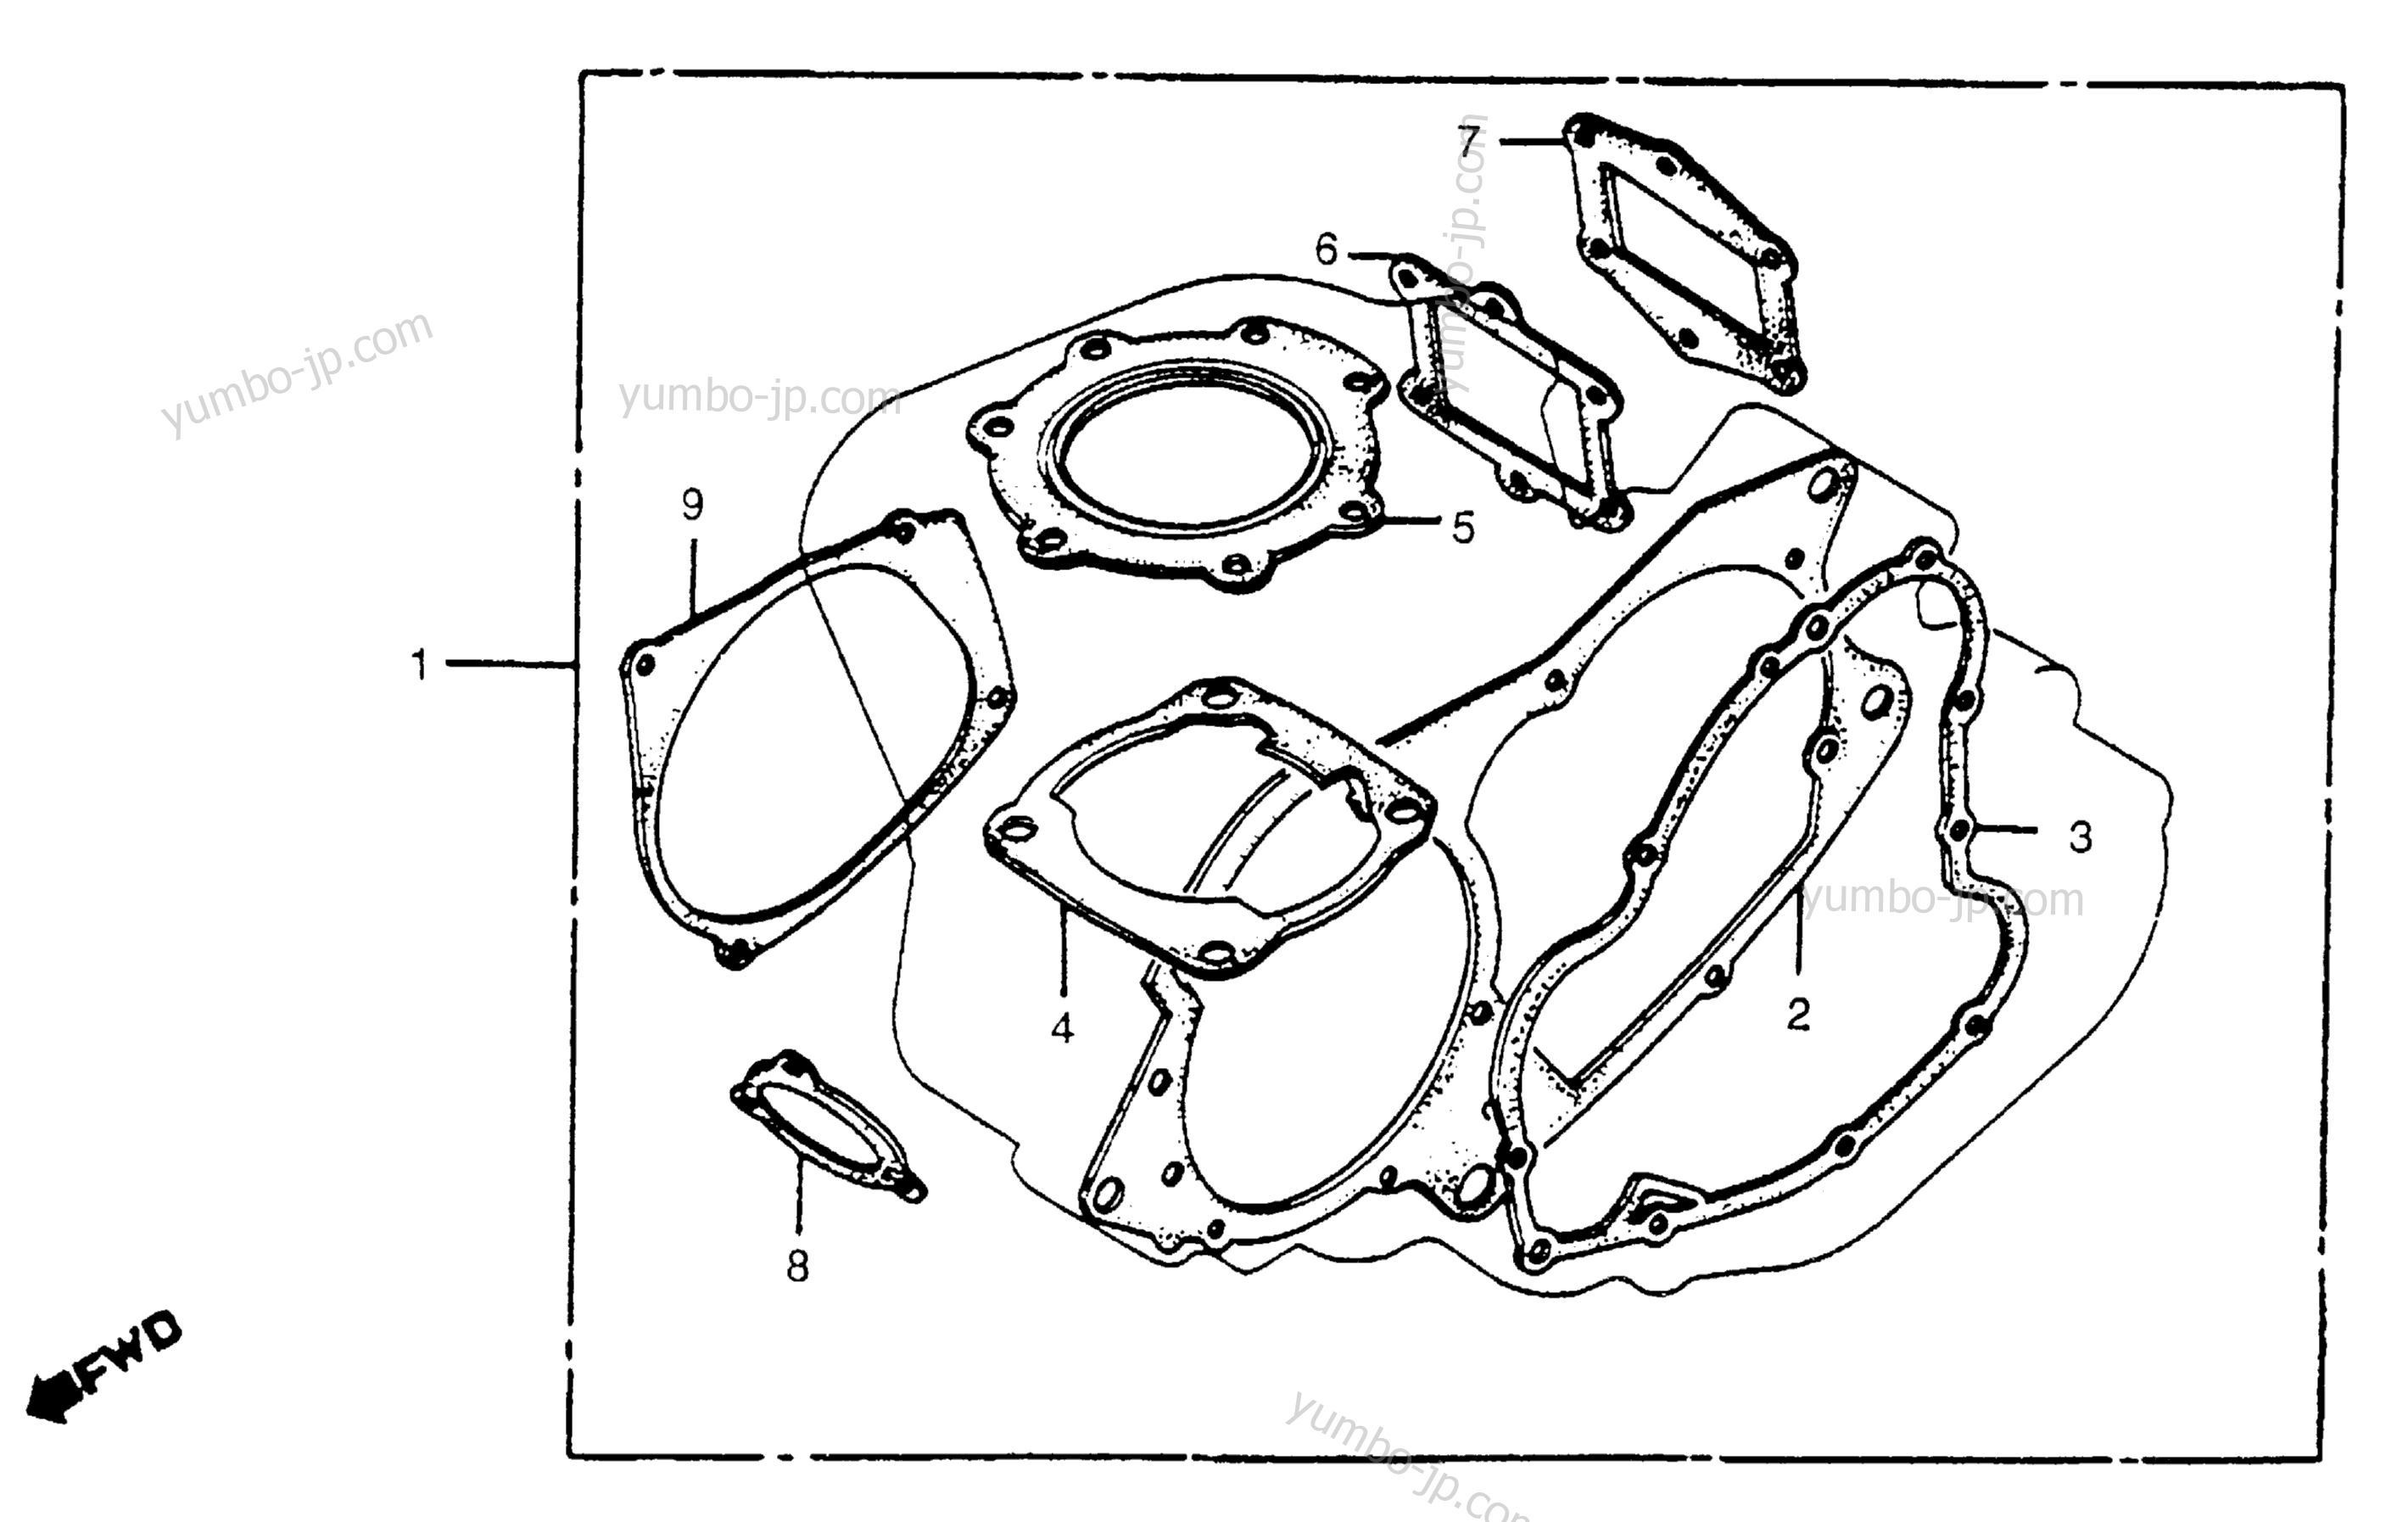 GASKET KIT for motorcycles HONDA CR450R A 1981 year